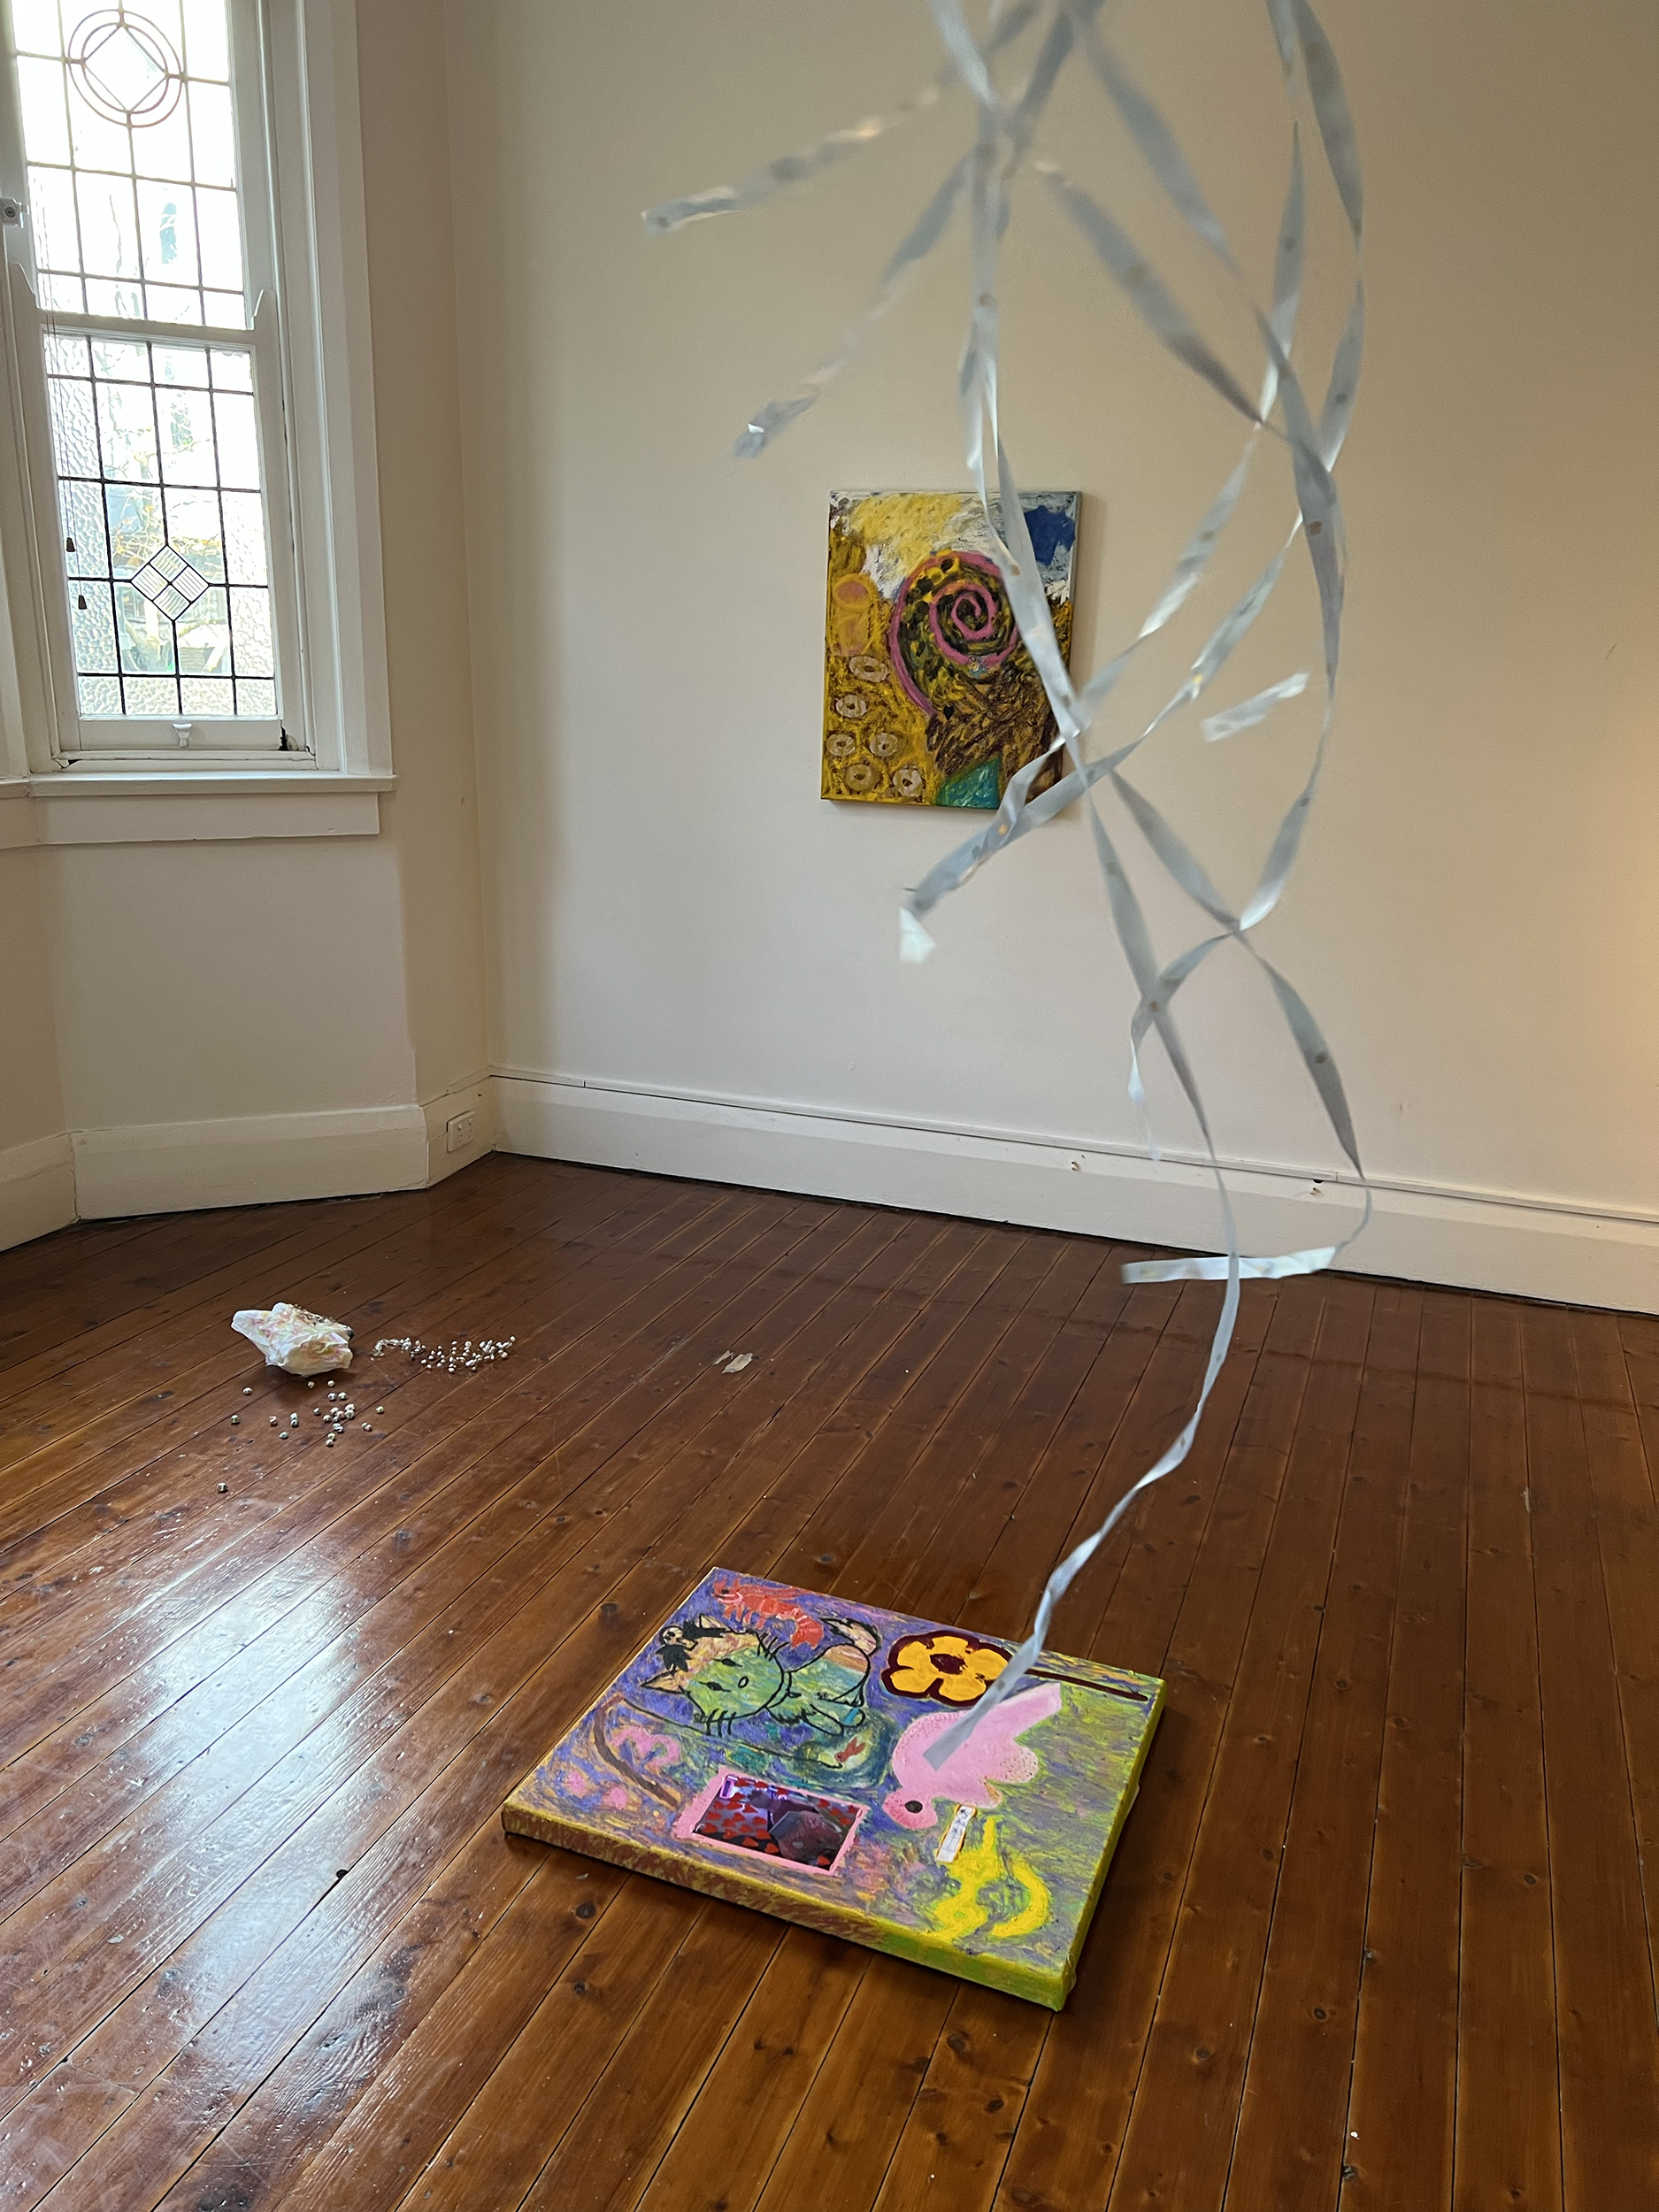 Installation view: Jemi Gale, <em>donut king (paintings about love)</em>, 2022, Suite7a. Image courtesy of Suite7a